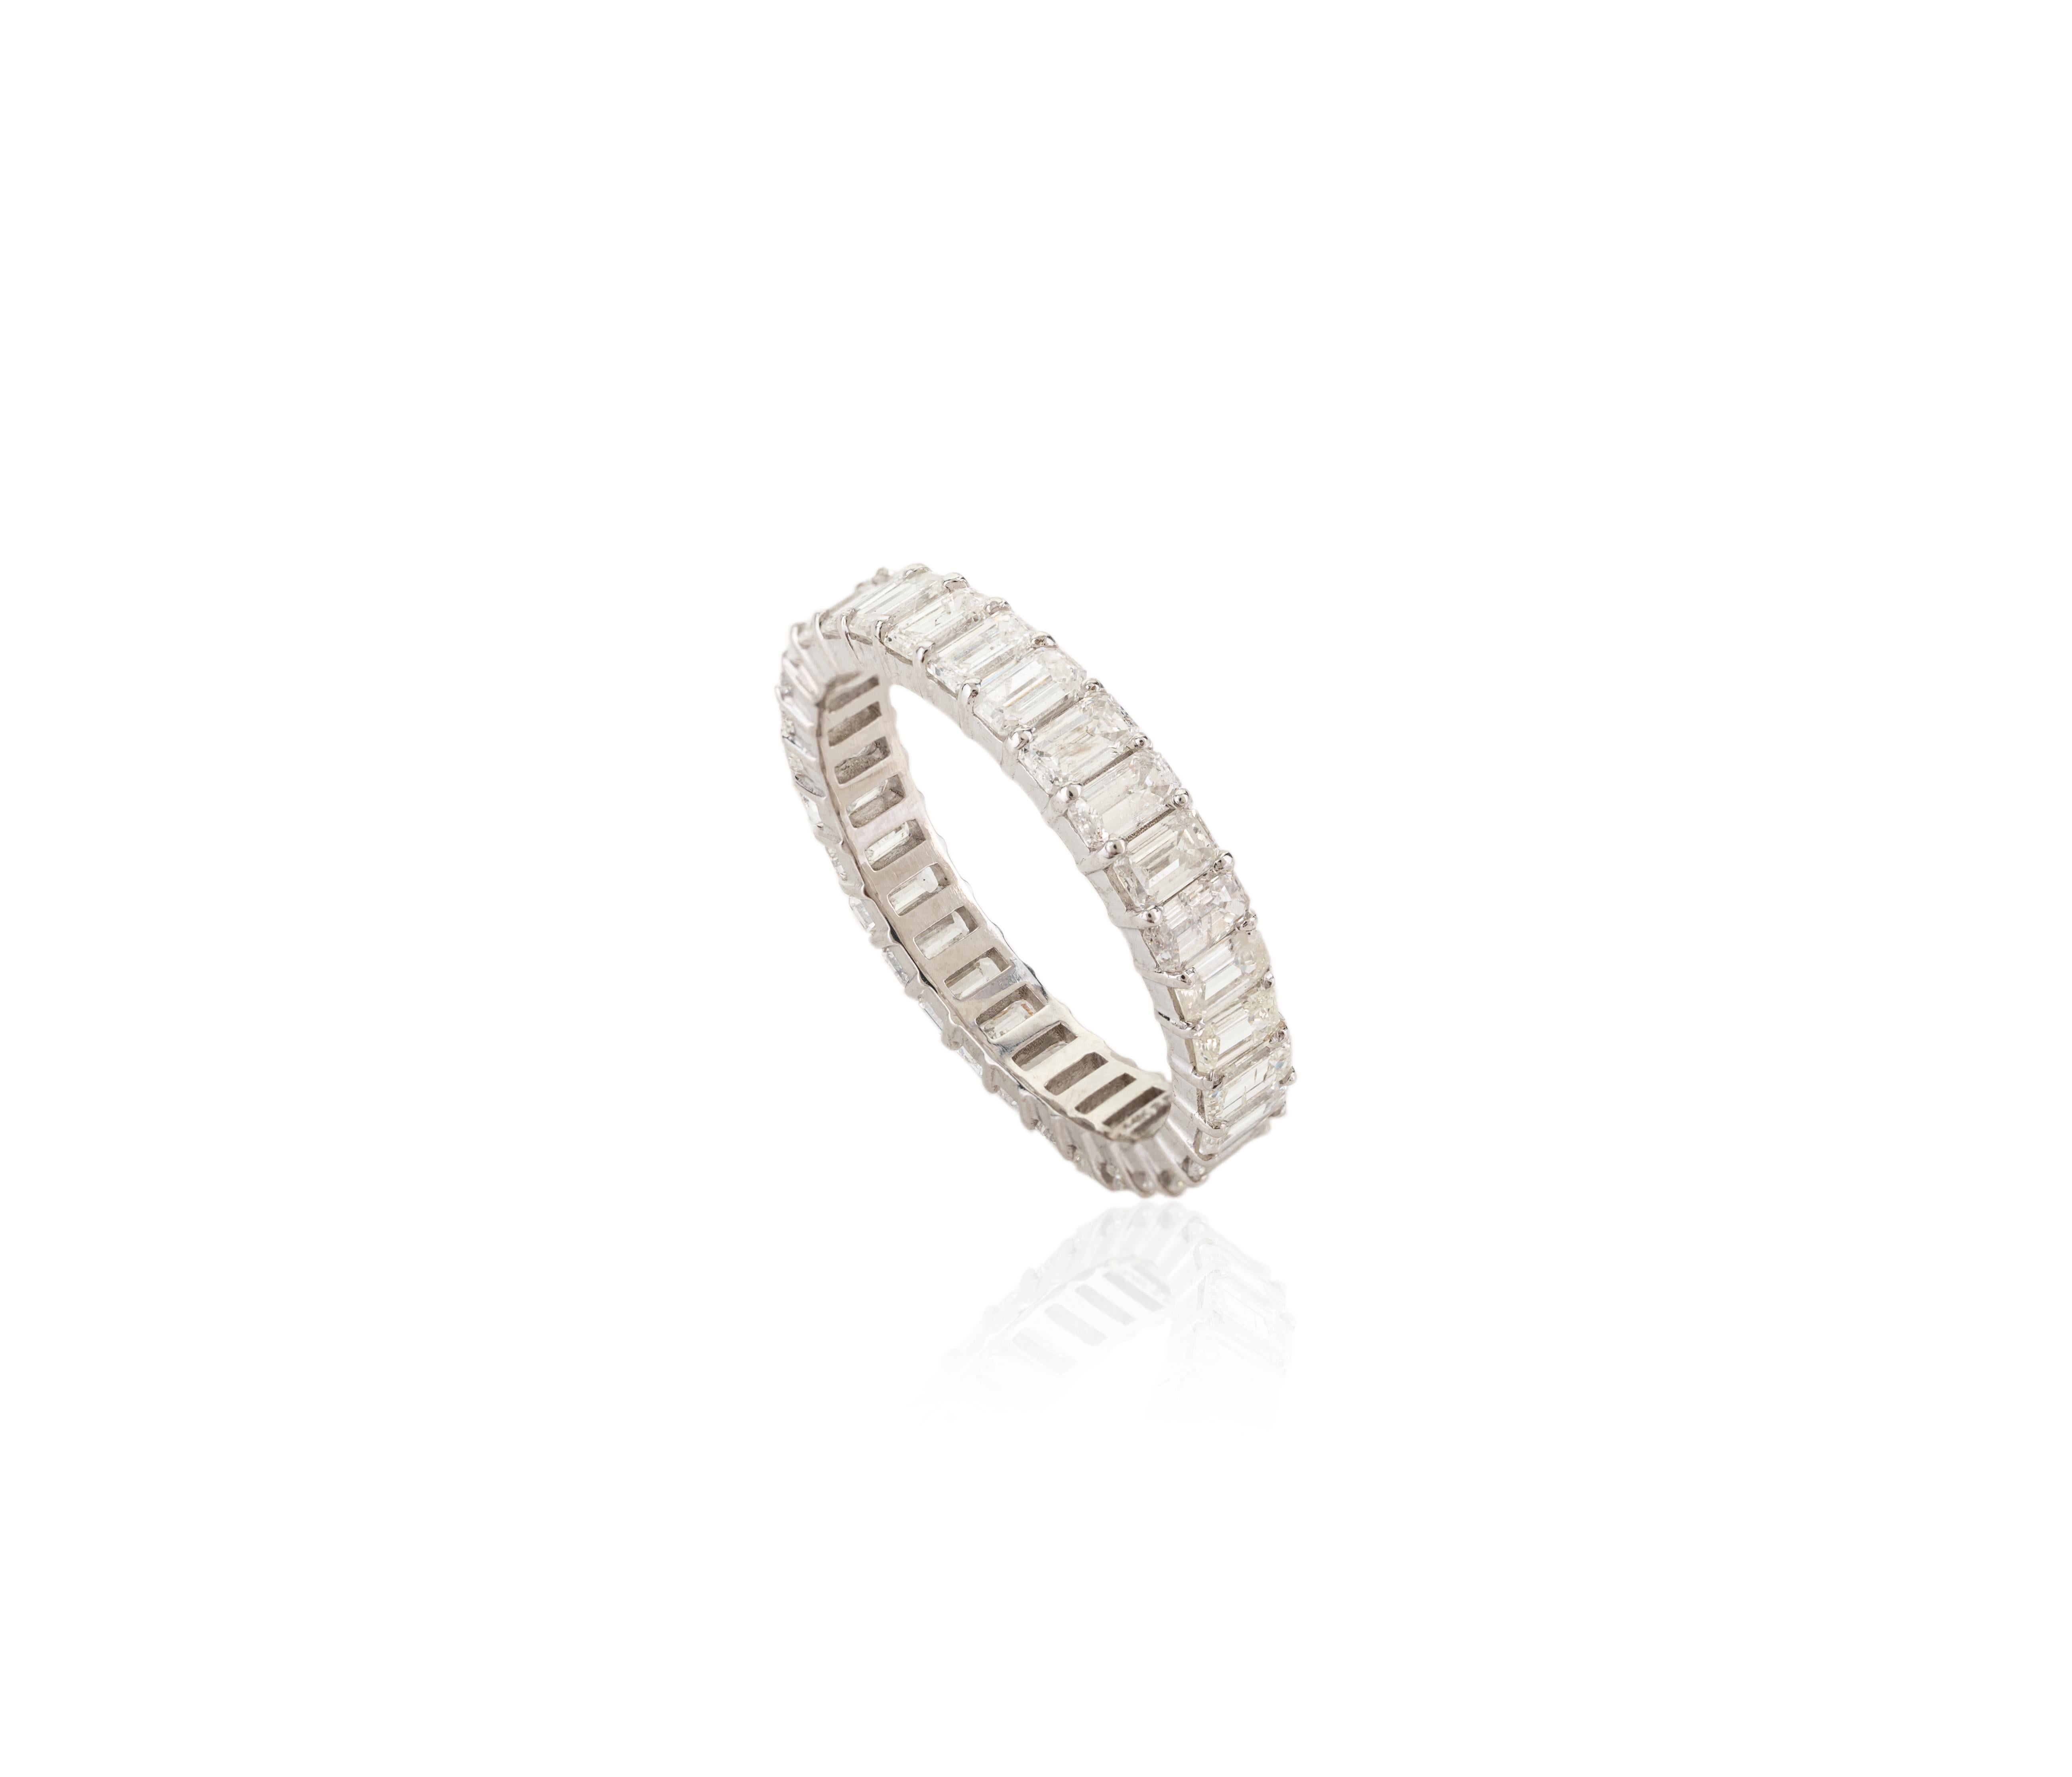 For Sale:  2.86 Carat Emerald Cut Diamond Eternity Band Ring in 14k Solid White Gold 7